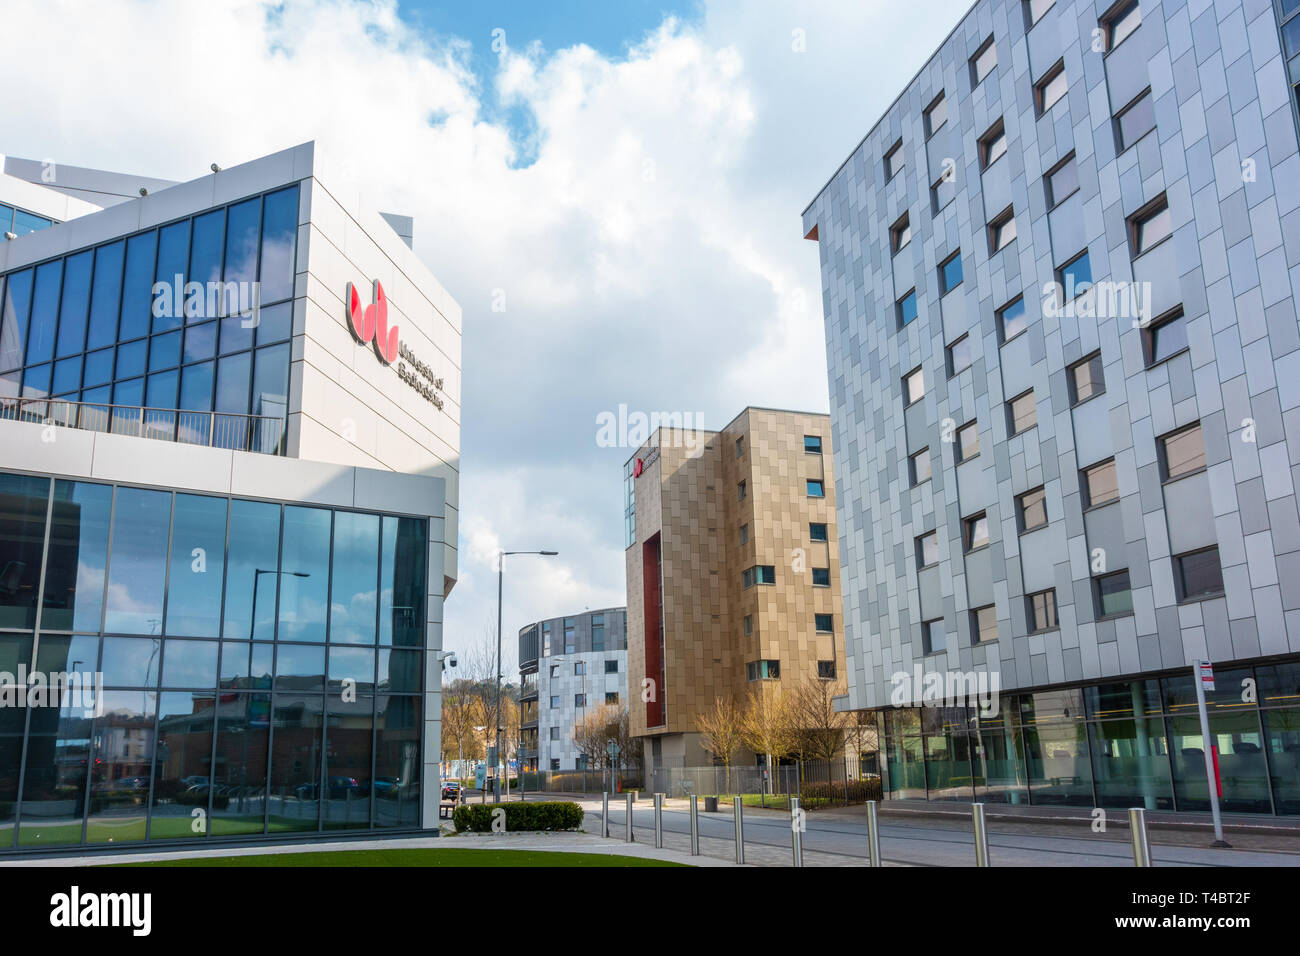 VIews of the campus at The University of Bedfordshire in Luton, UK Stock Photo